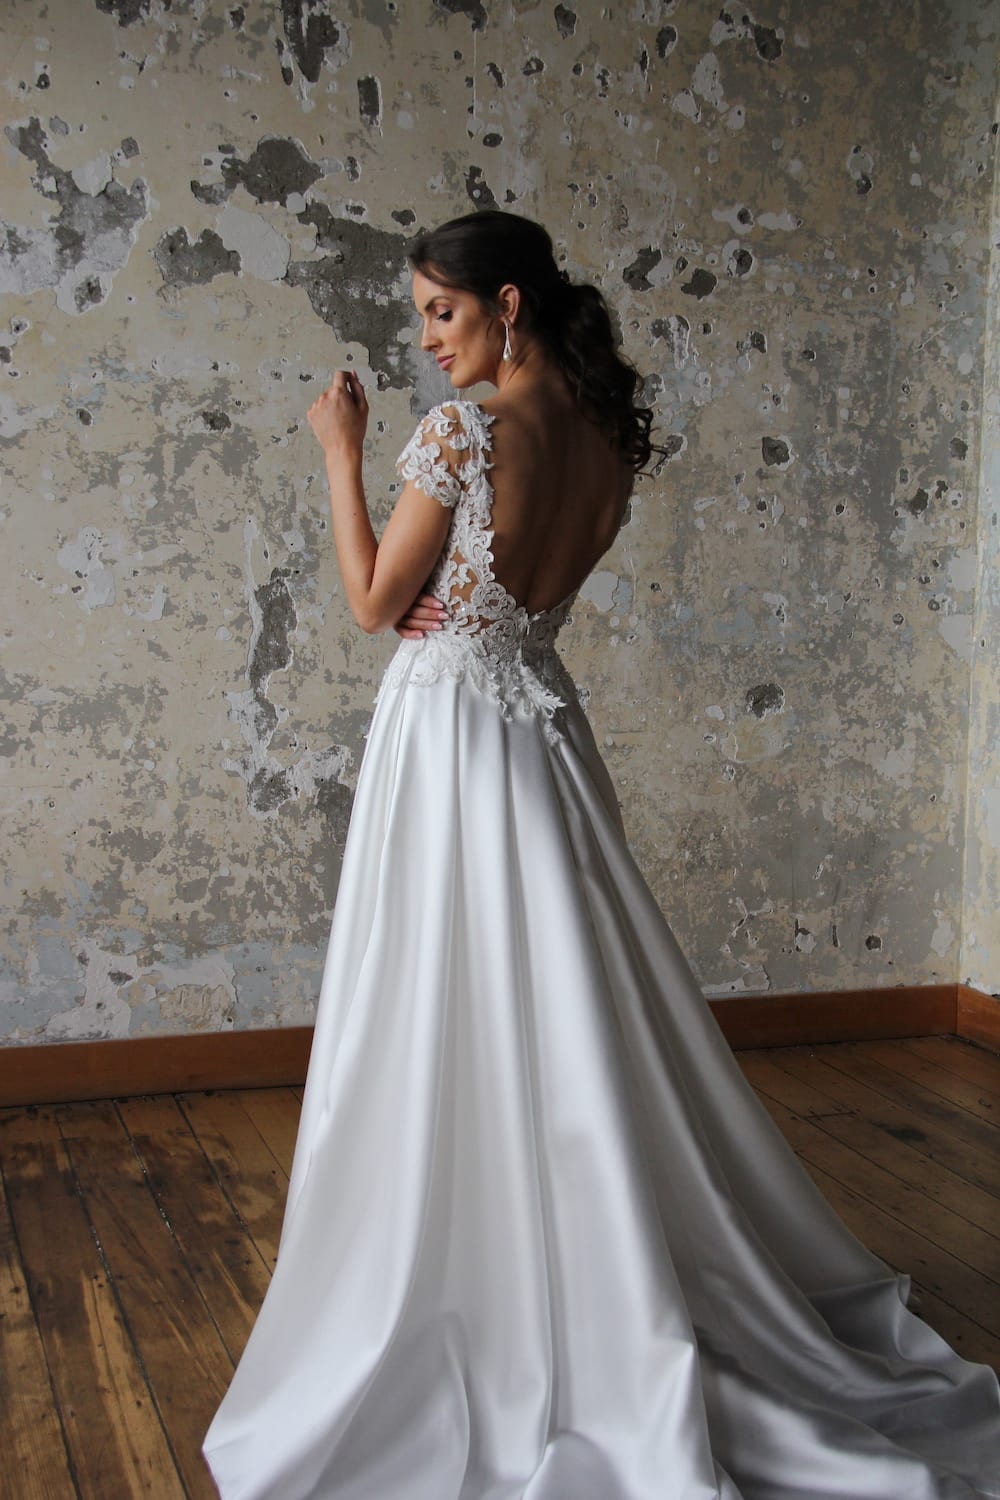 Female model wearing Vinka Design Modern Muse Wedding Dress. In chic warehouse the back detail of a gown with a sheer high neckline, low back edged with lace and a skirt with pockets.